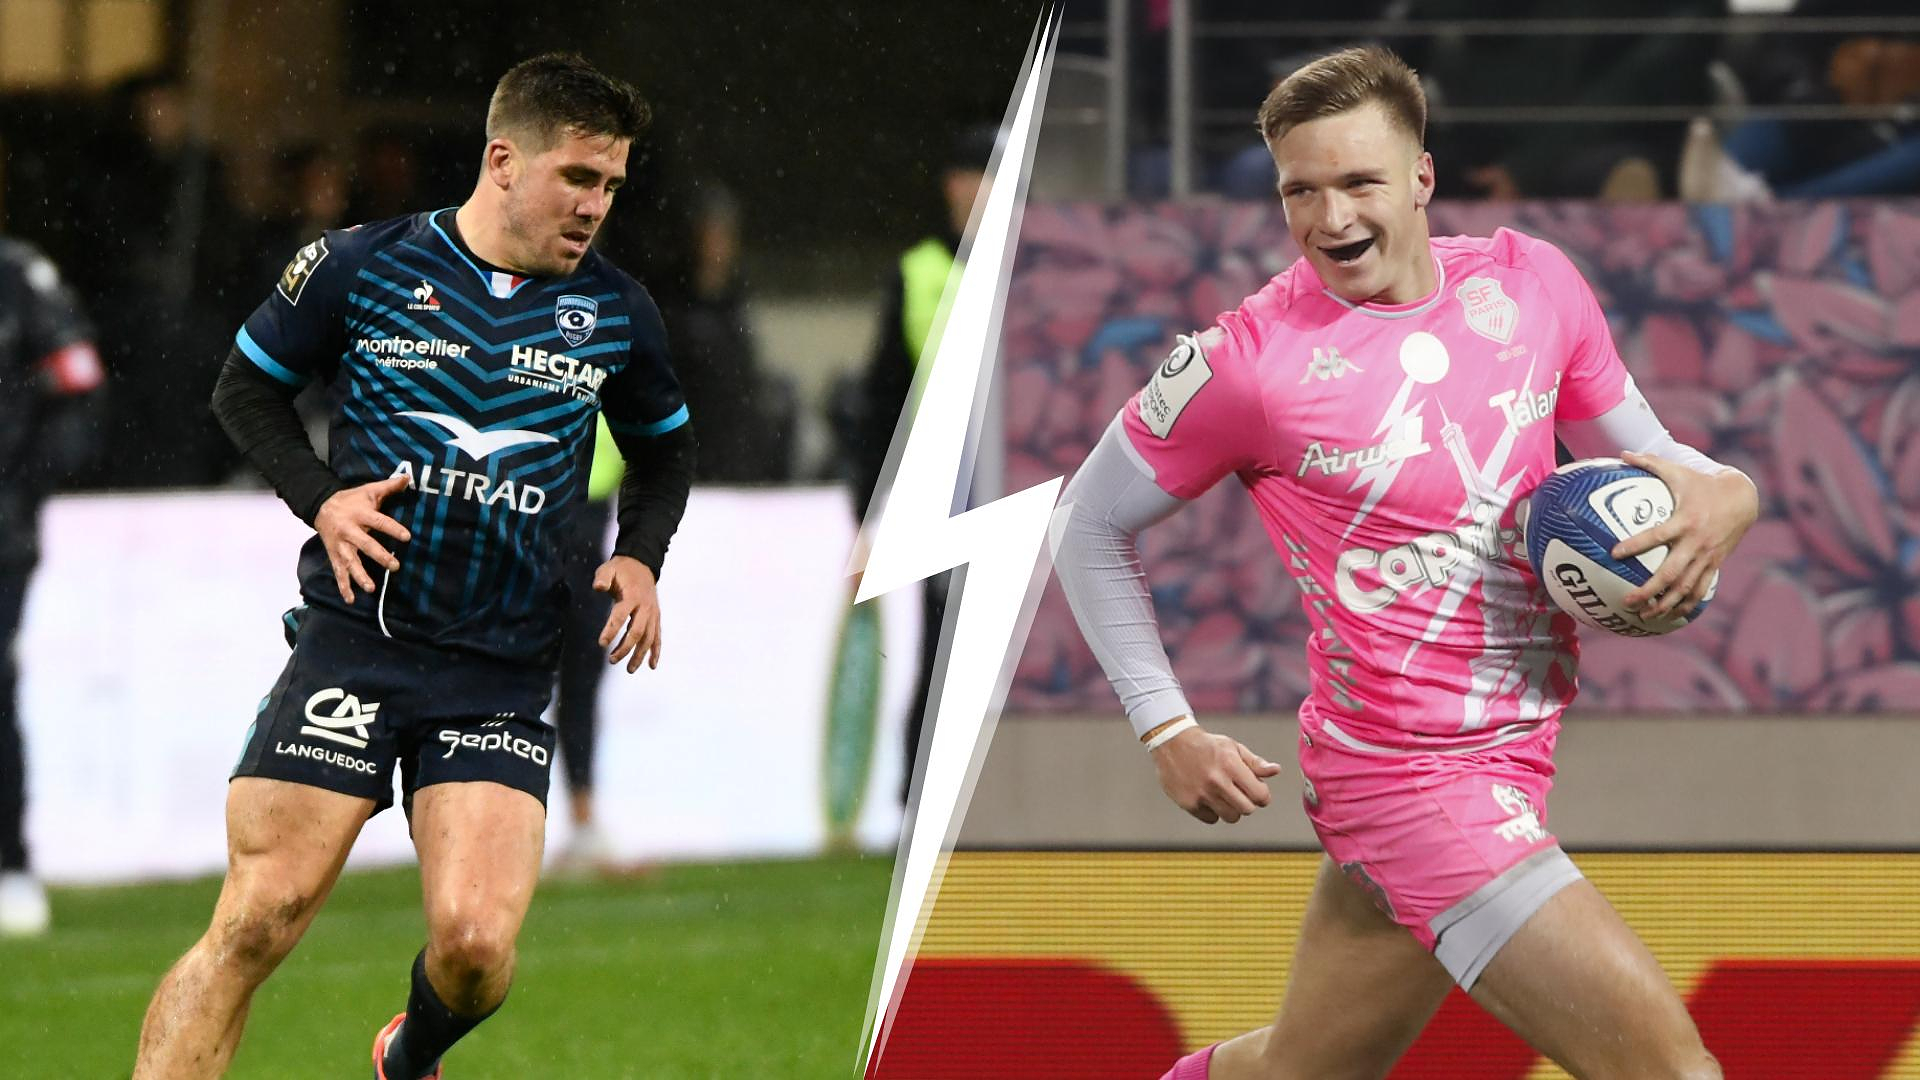 Top 14: at what time and on which channel to watch Montpellier-Stade Français?